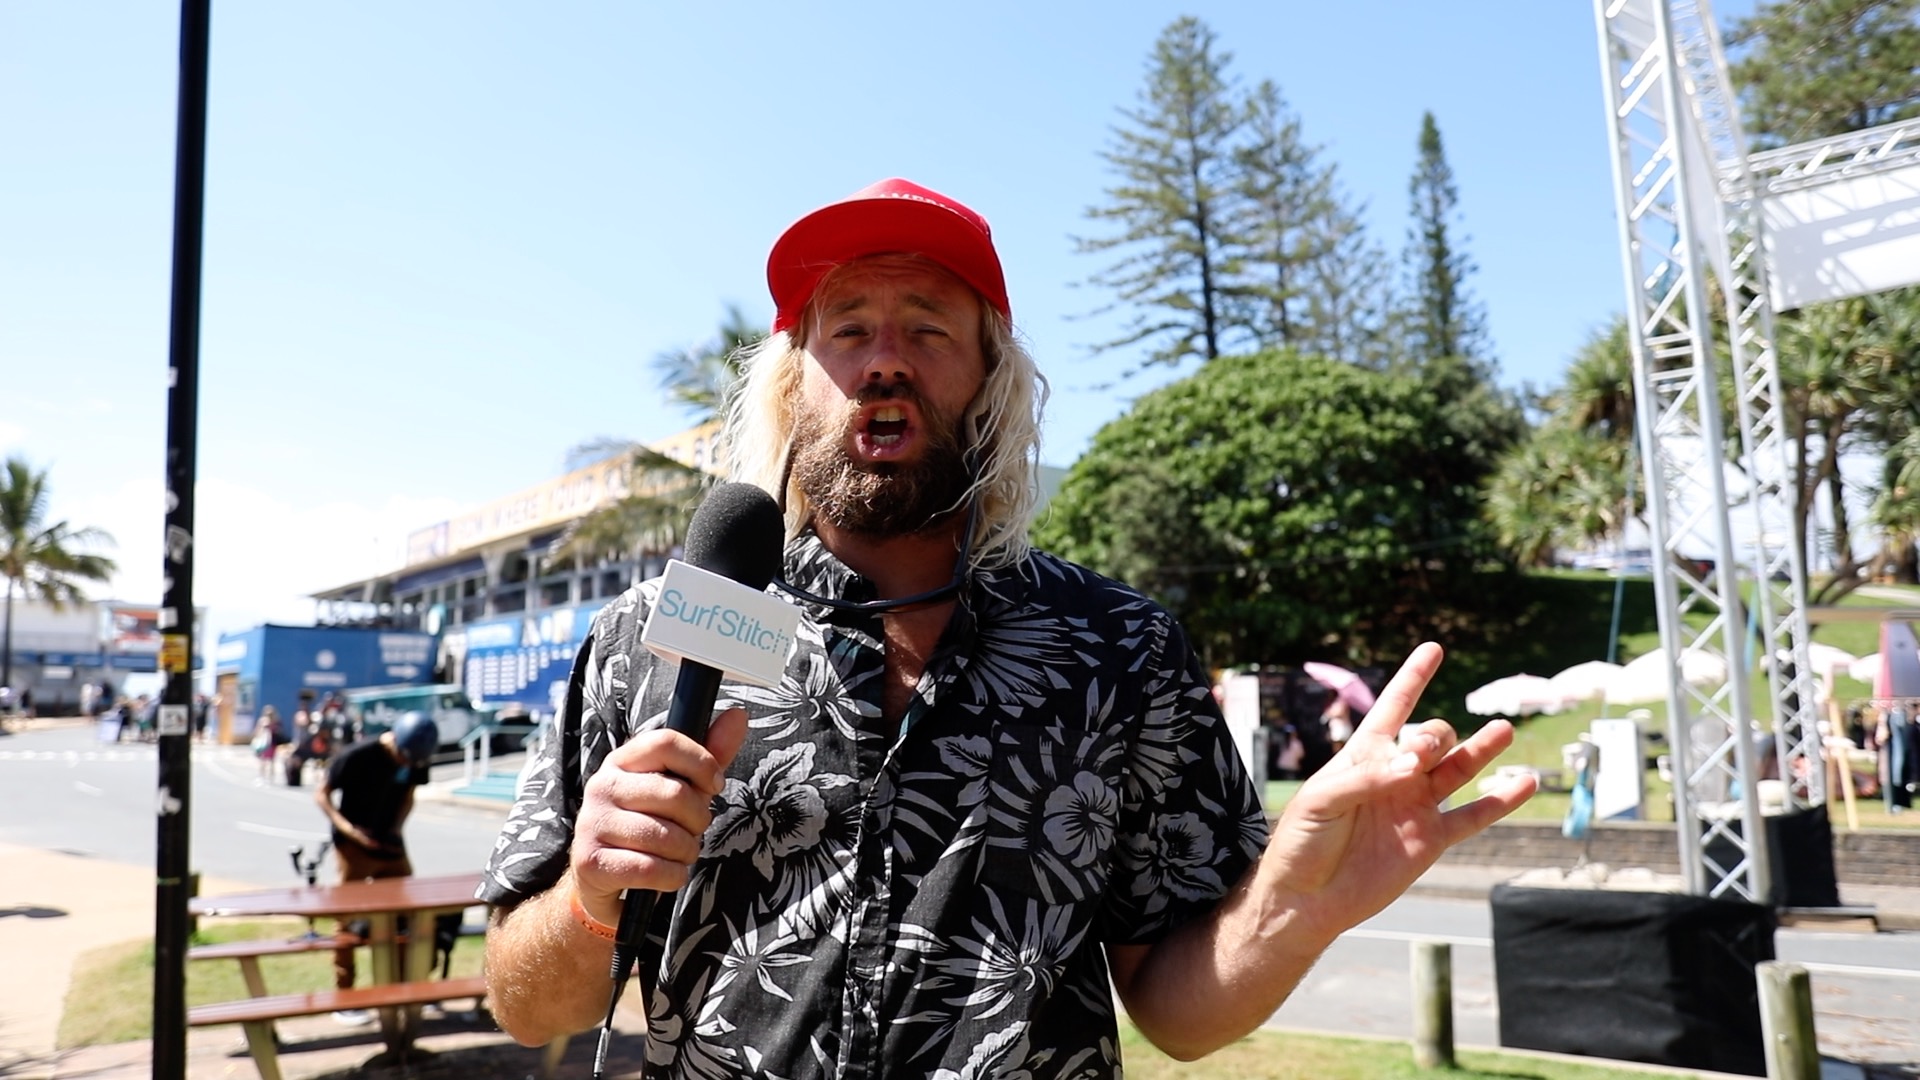 Go VIP: Tyler Allen, the Quiksilver Pro and the biggest names in surfing